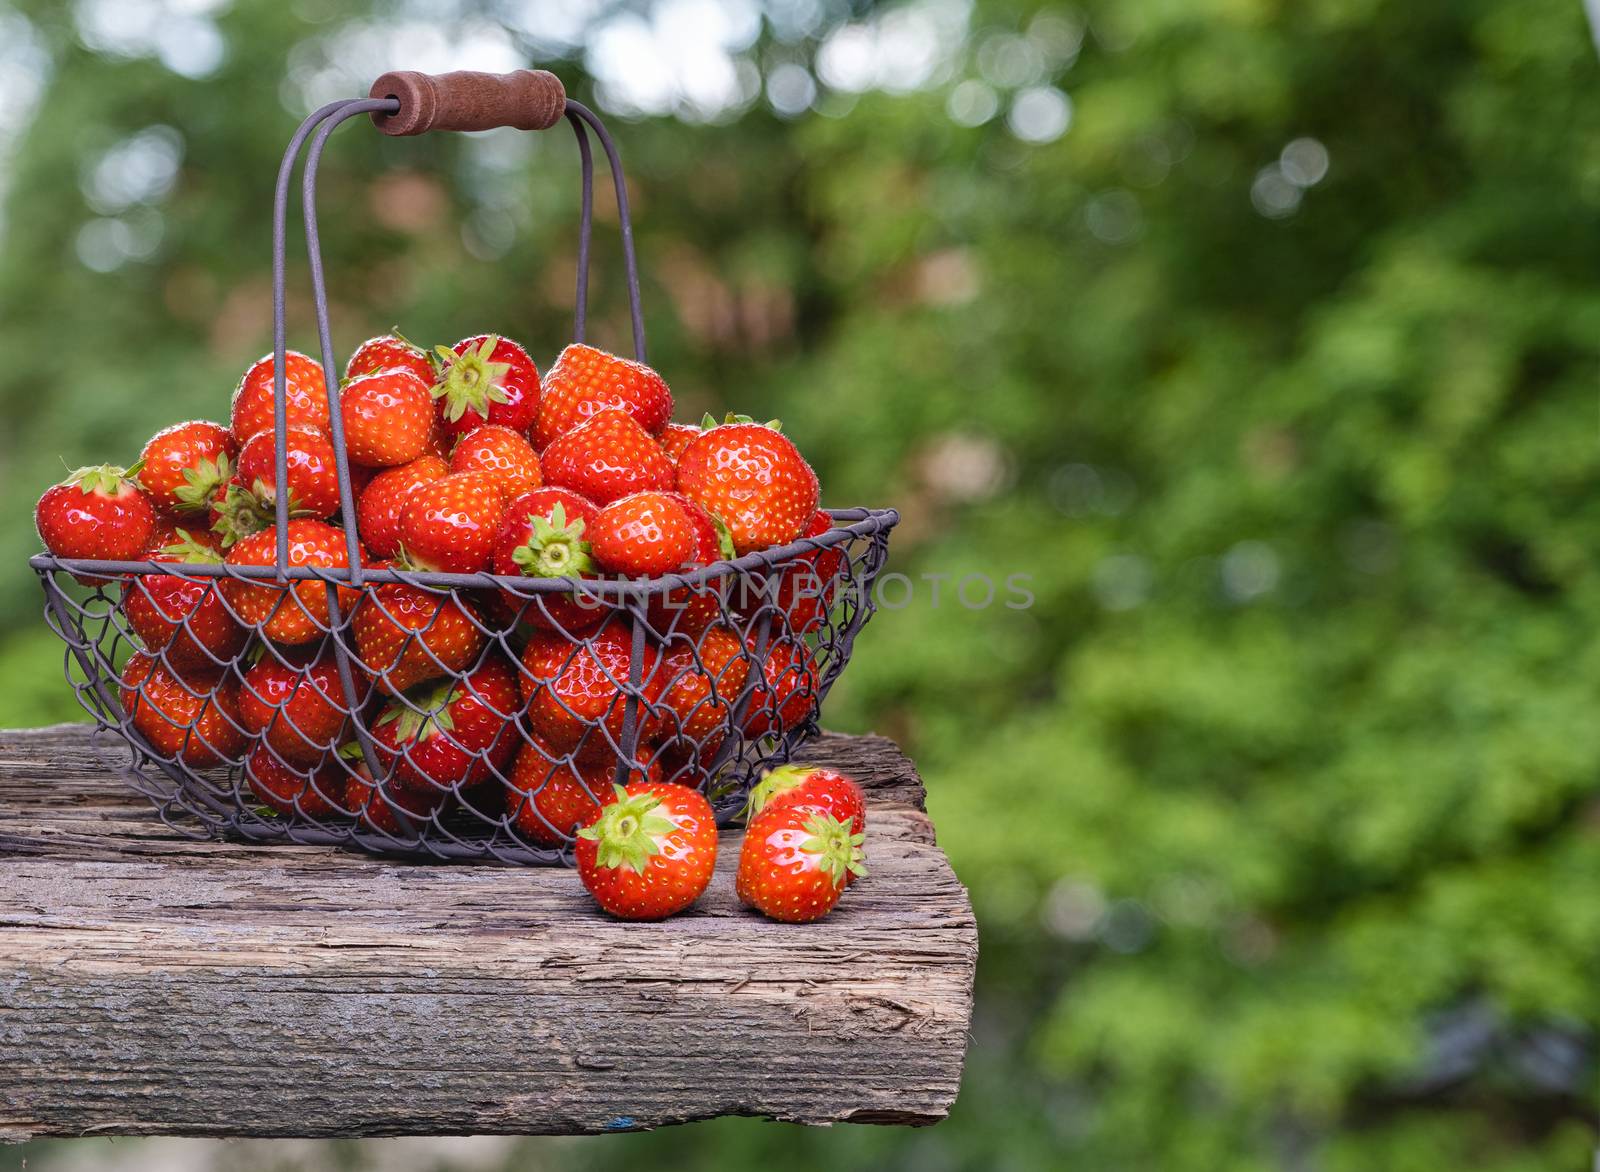 Strawberry with strawberry leaf in a metal basket. by Fischeron